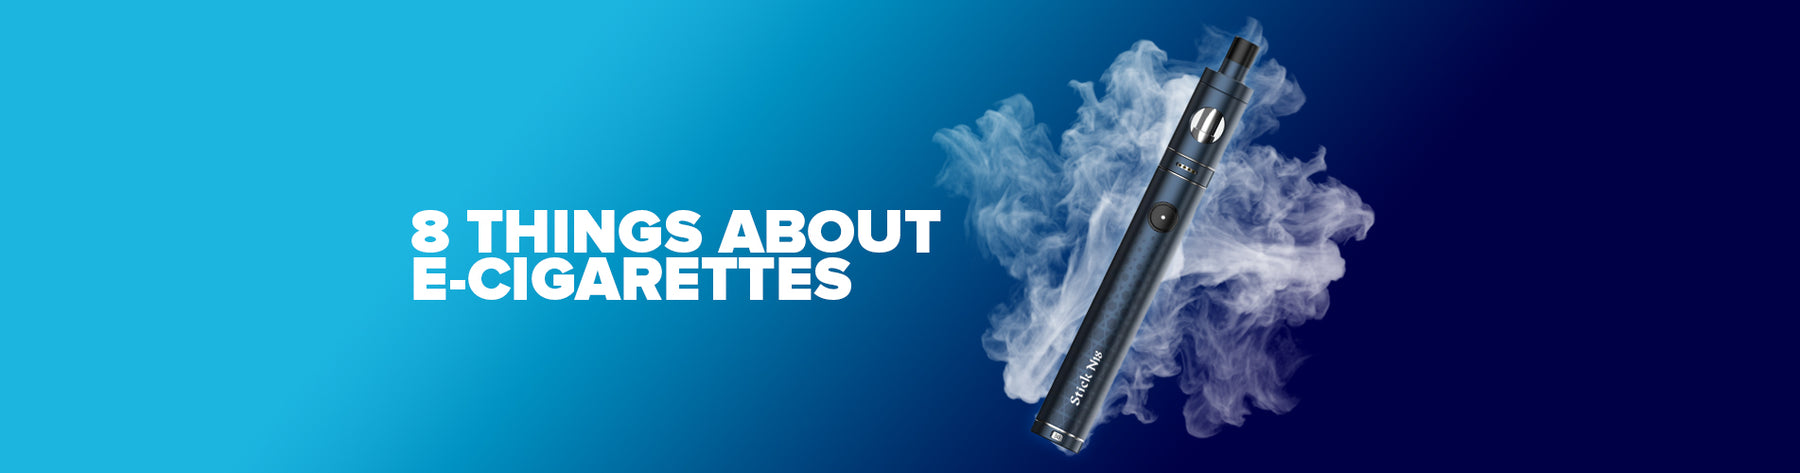 8 Things About Ecig